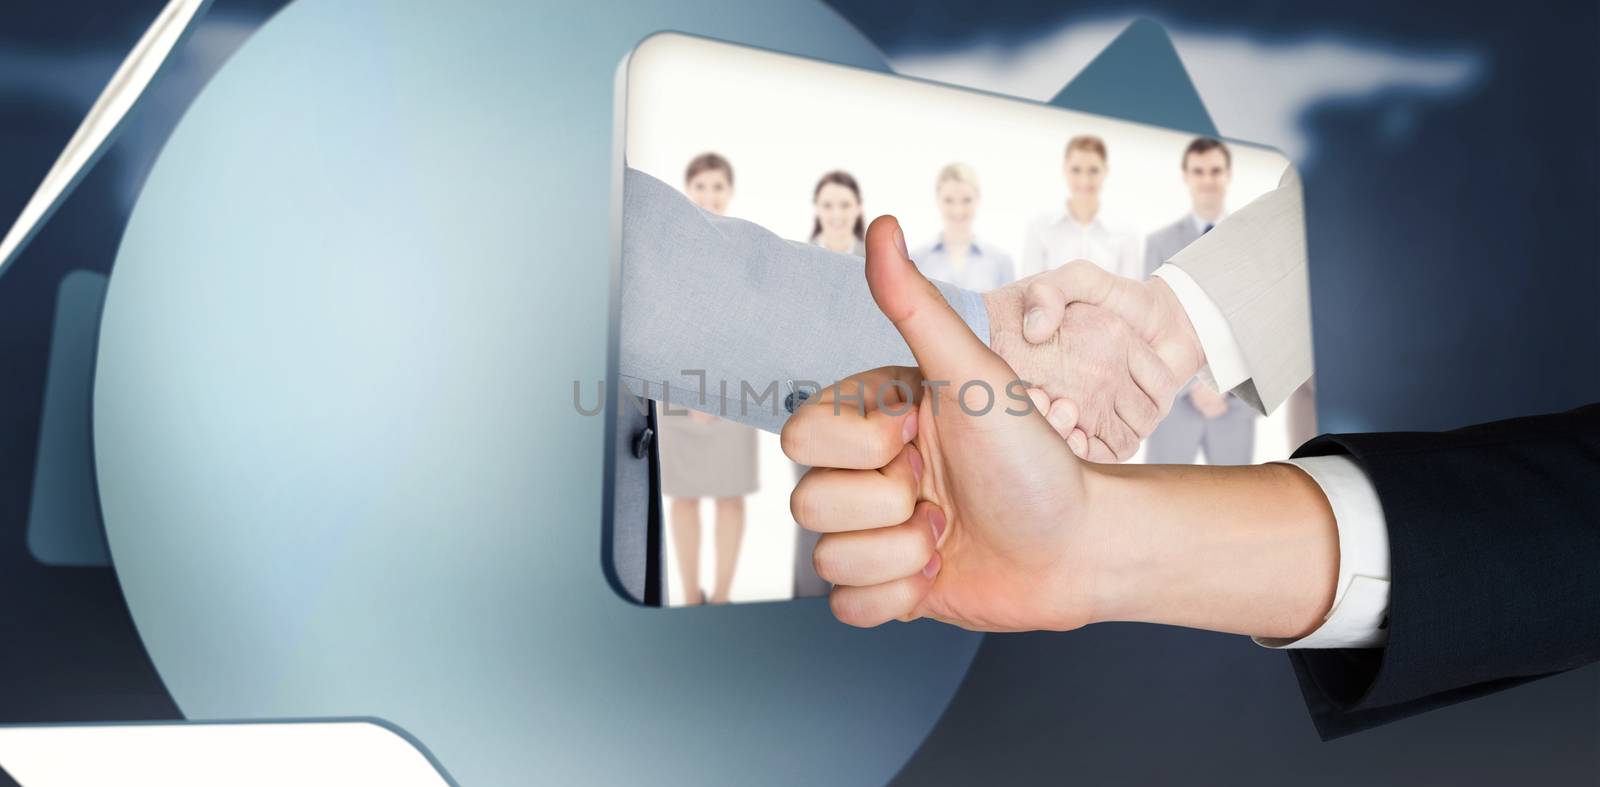 Hand showing thumbs up against screen displaying handshake and business people in digital inter